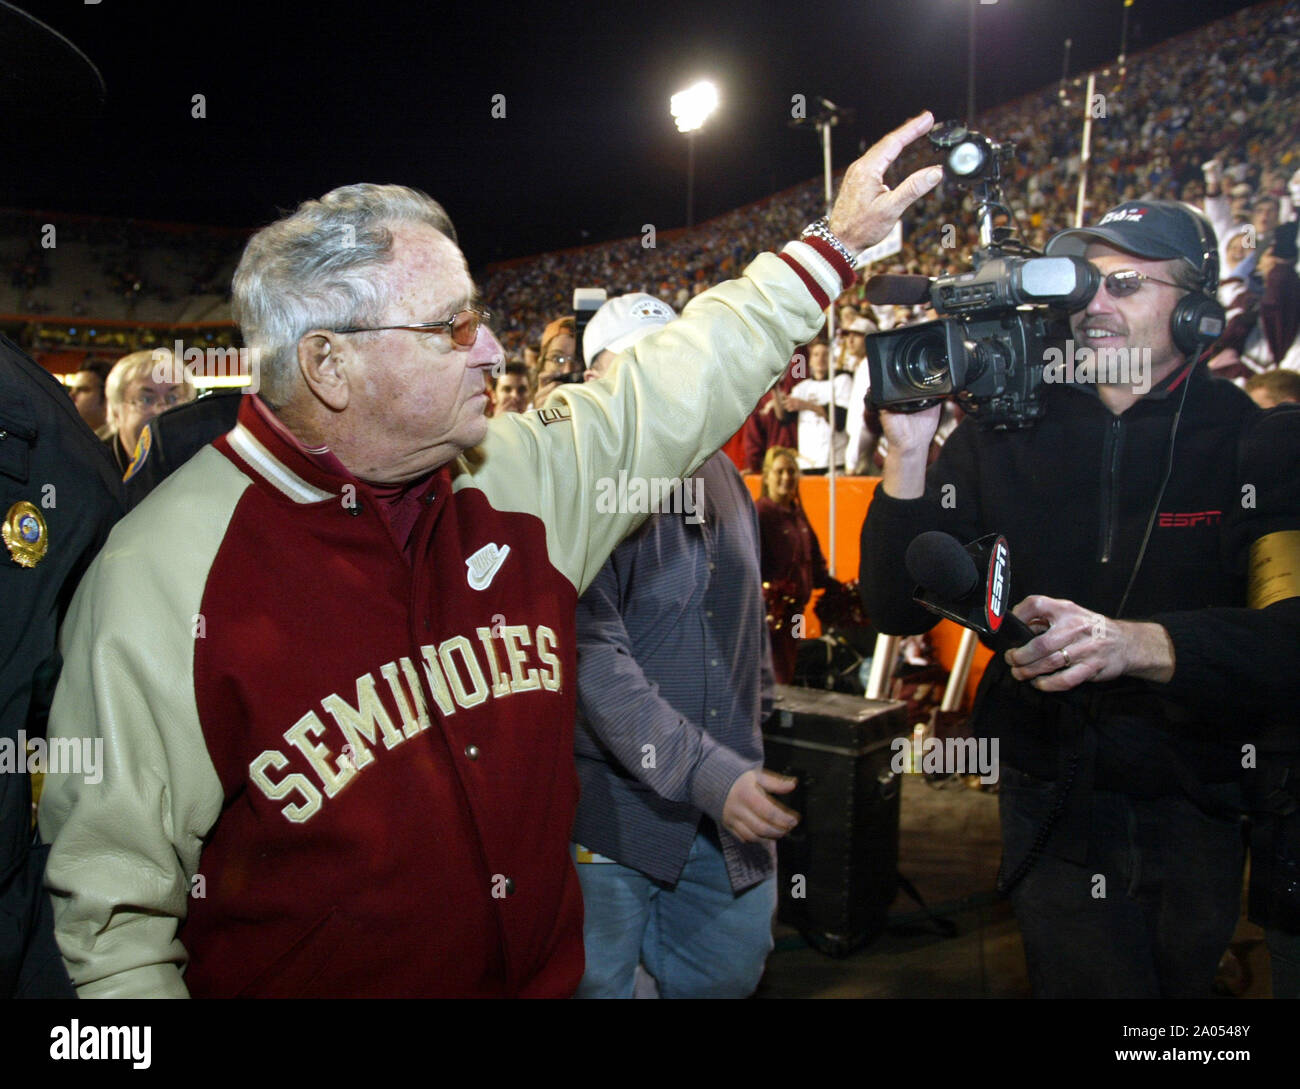 Florida State coach Bobby Bowden waves to the crowd following the Seminole's 38-34 victory over the Gators Saturday, November 29, 2003, at Ben Hill Griffen Stadium in Gainesville, Florida. Stock Photo